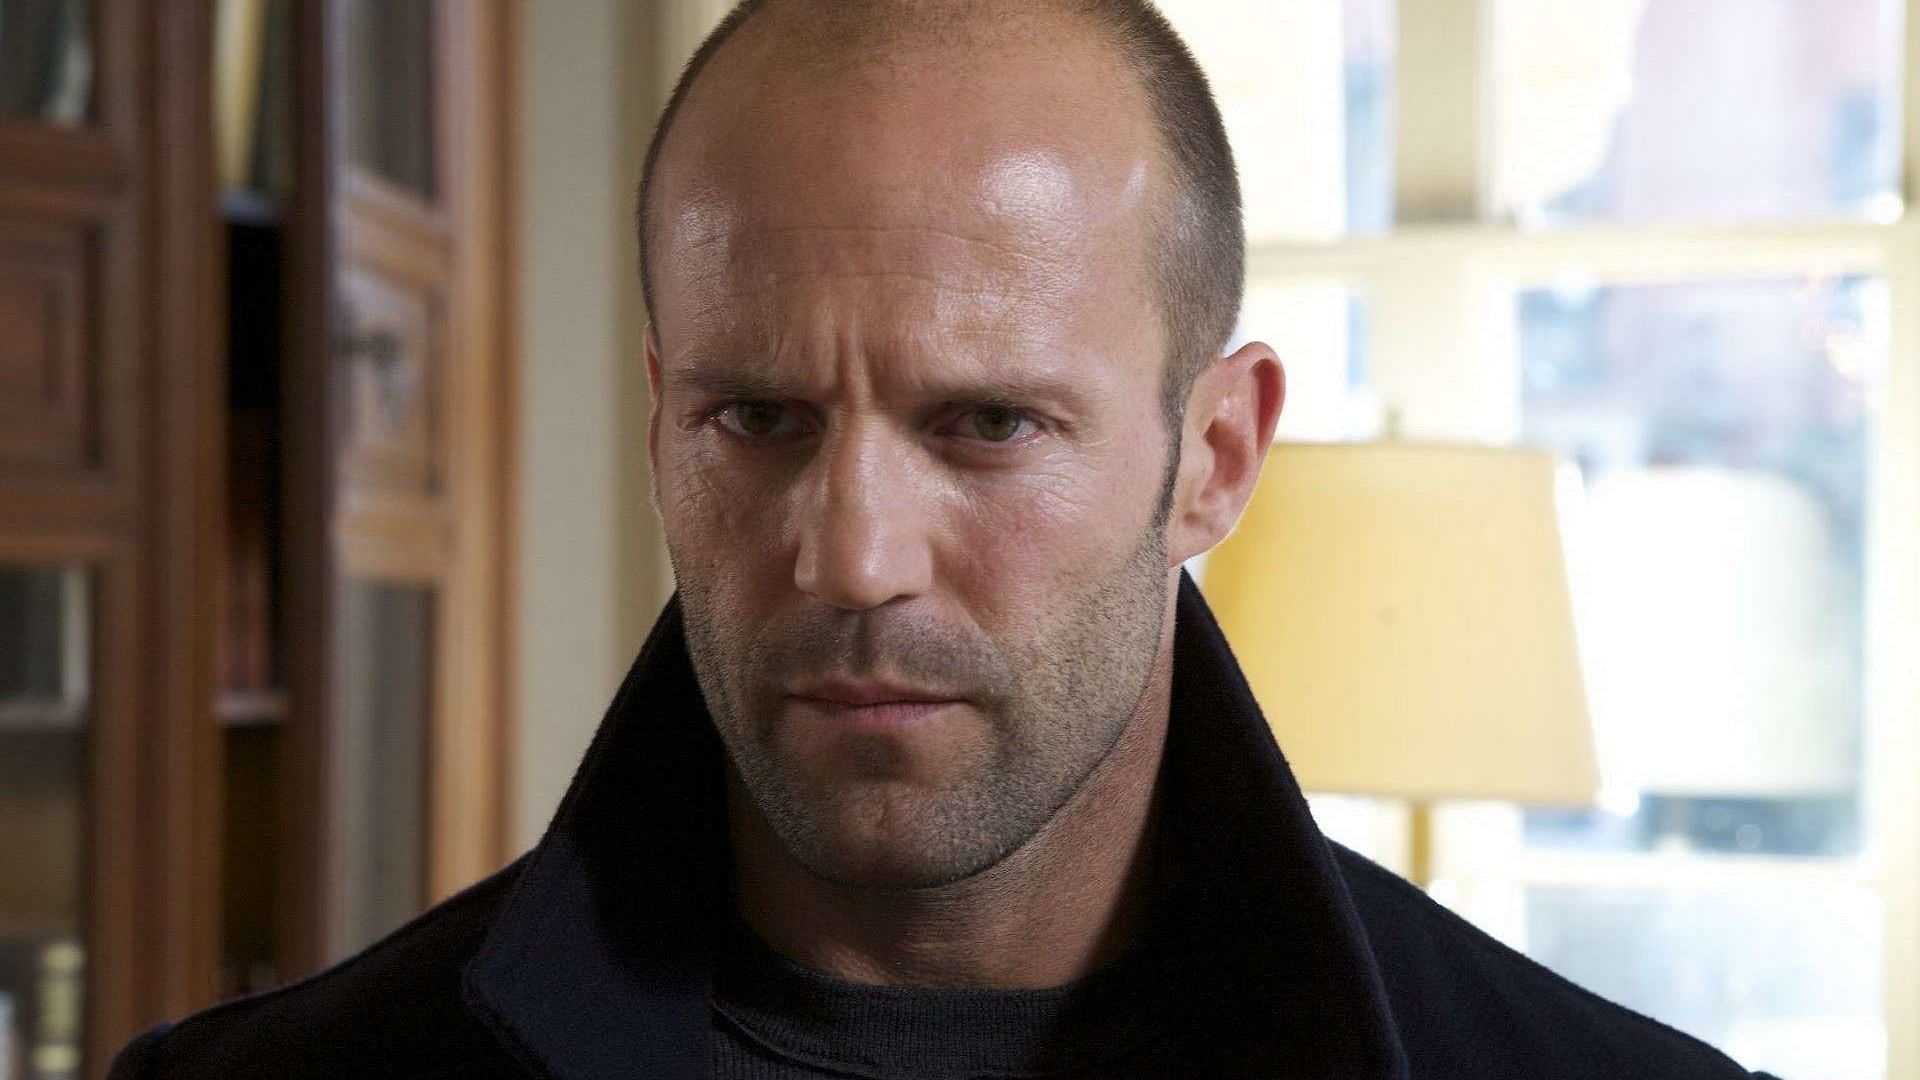 Get ripped like Jason Statham by following his routine. (Image via wallpaperaccess)